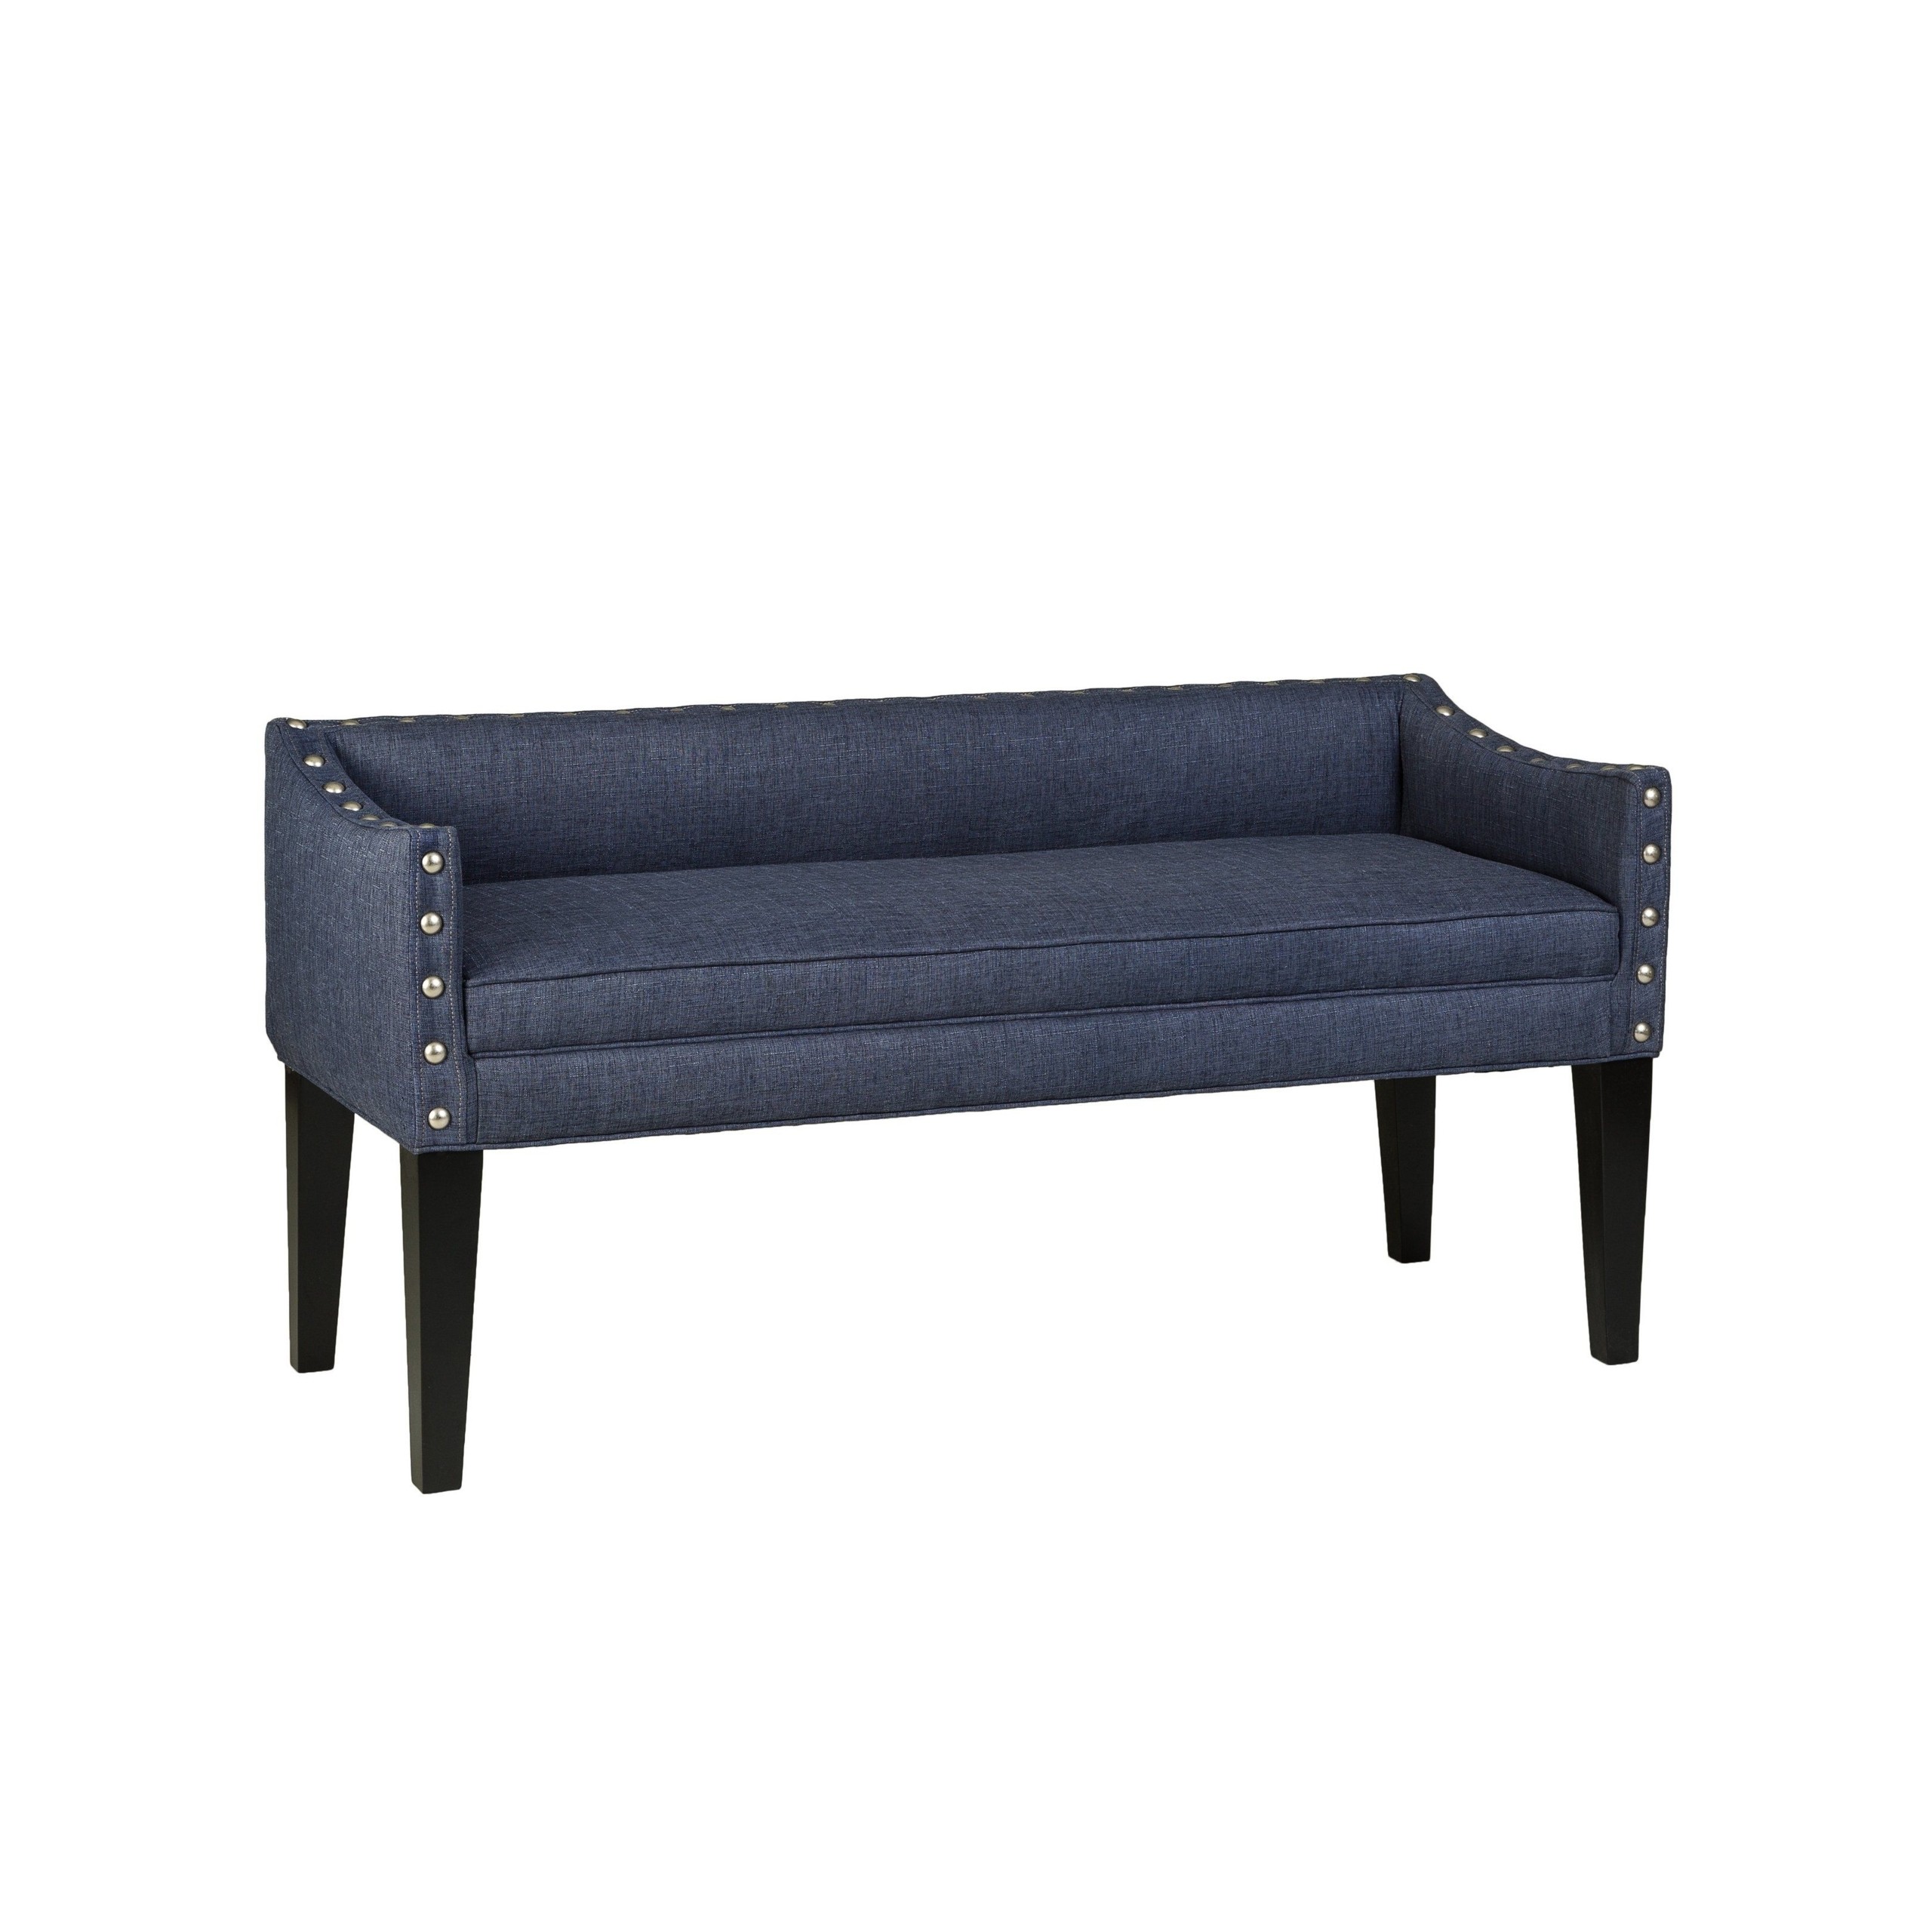 Whitney long upholstered bench with arms and nailhead trim 4